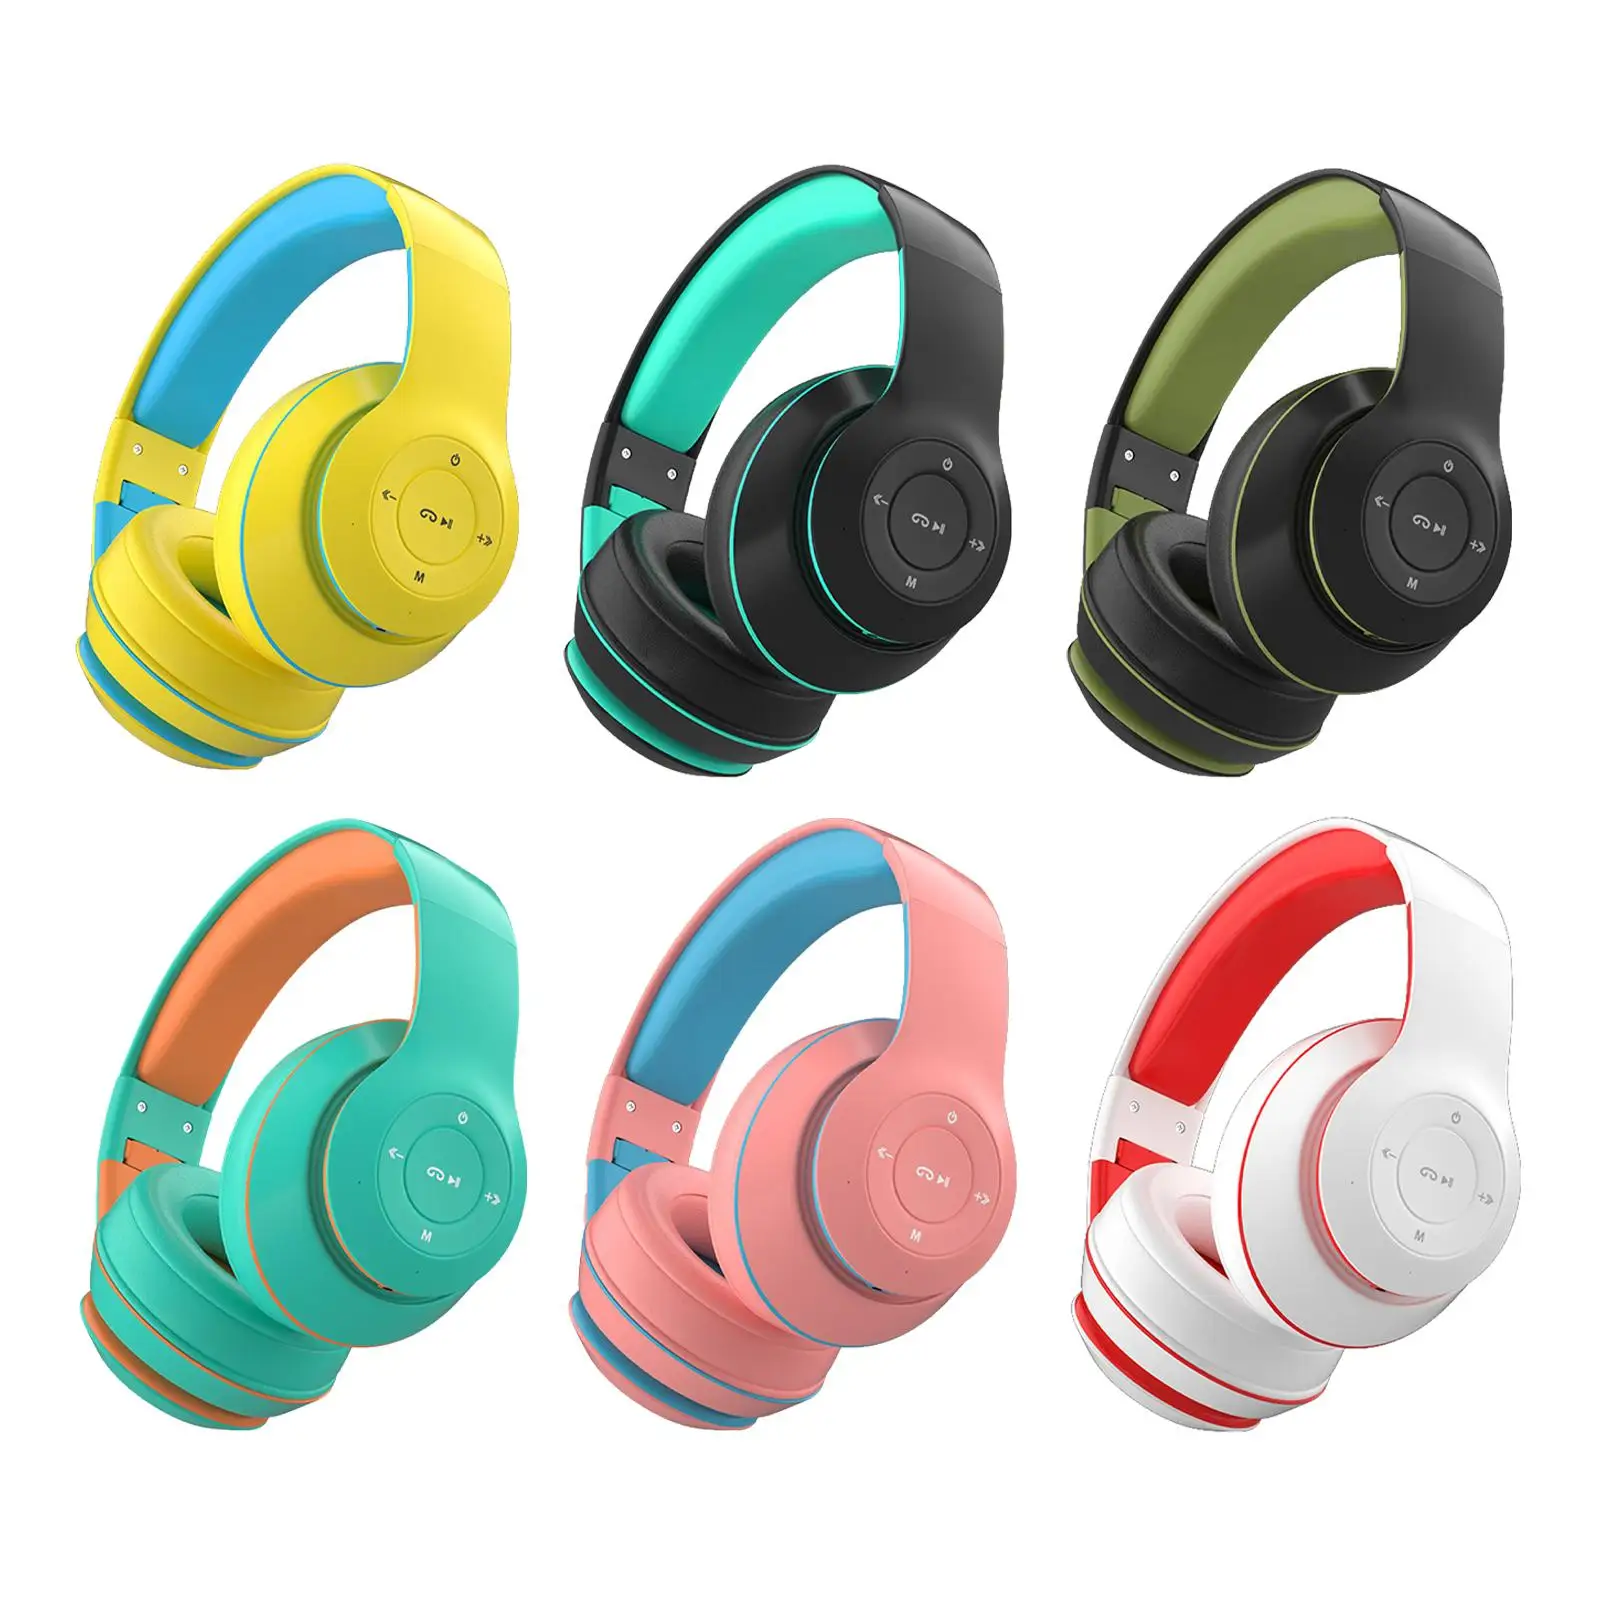 Wireless Headset Built in Microphone Lightweight Soft Protein Earmuffs Headphone for Laptop Cellphone Kids Gaming Online Course